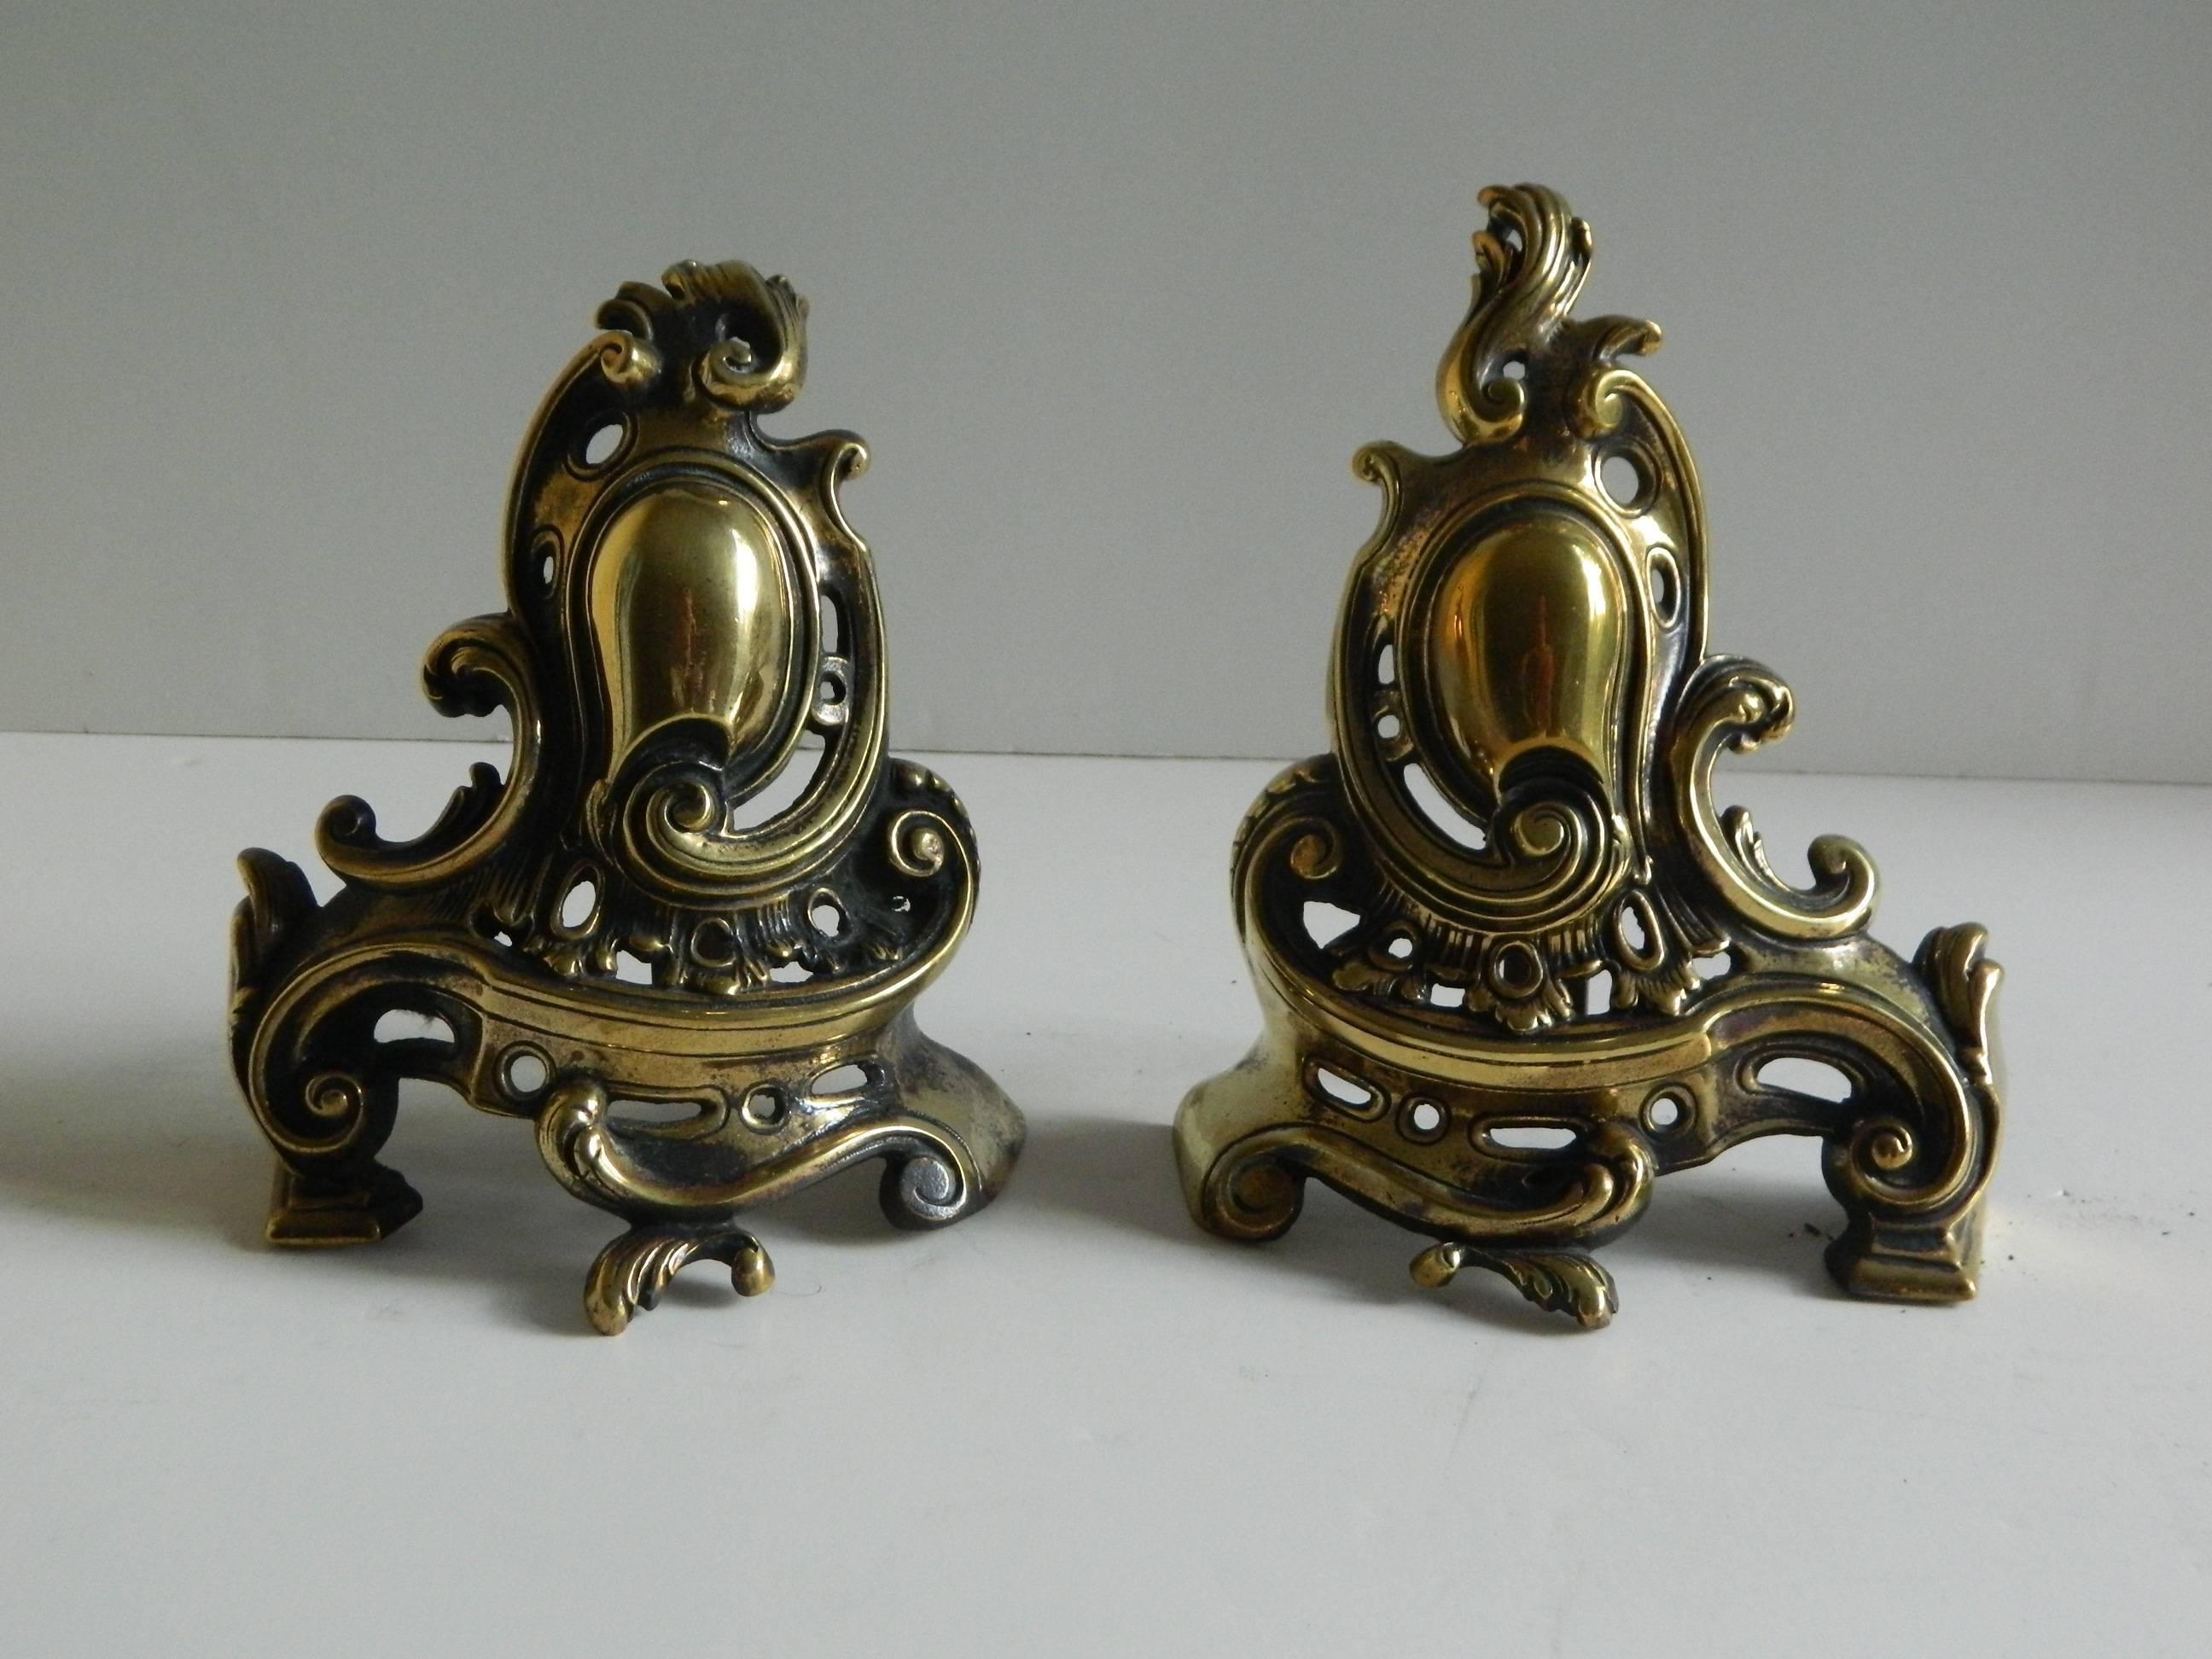 Pair of brass small chenets or andirons with shield and scrolls, 19th century.
   